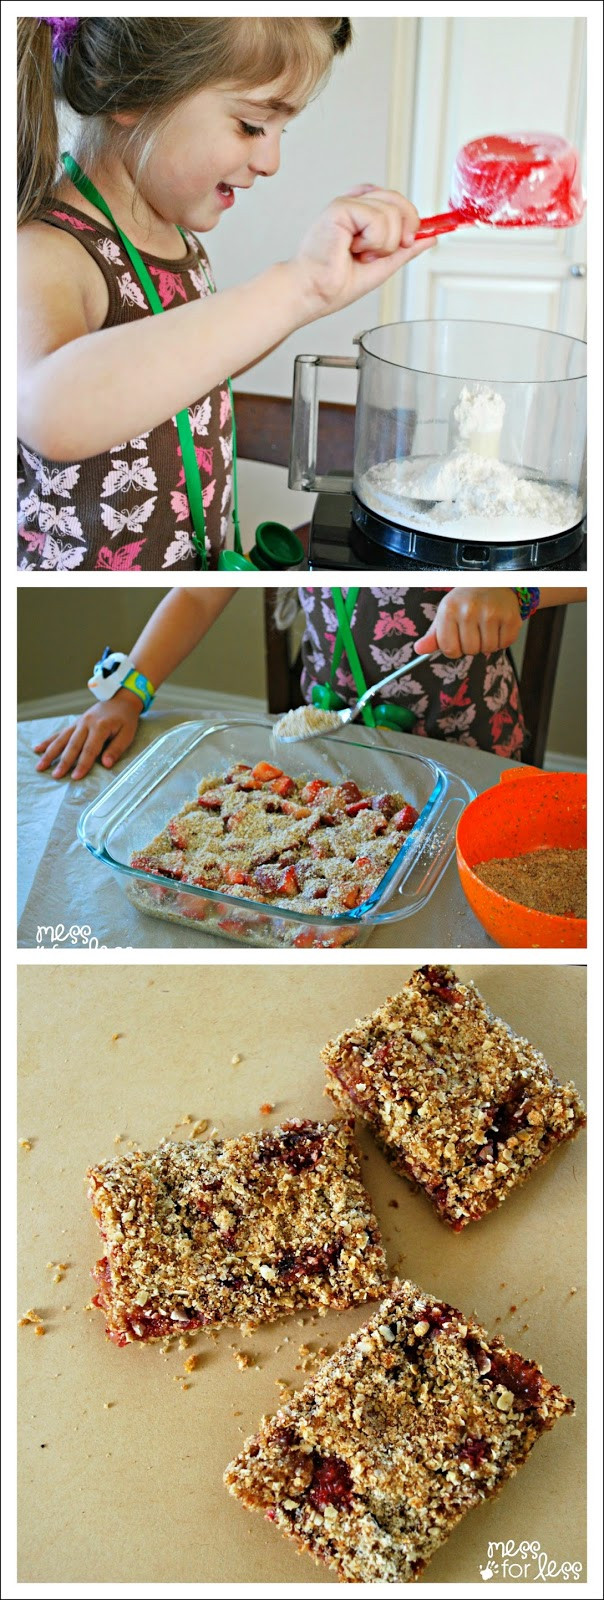 Breakfast Bars For Kids
 Strawberry Breakfast Bars Food Fun Friday Mess for Less